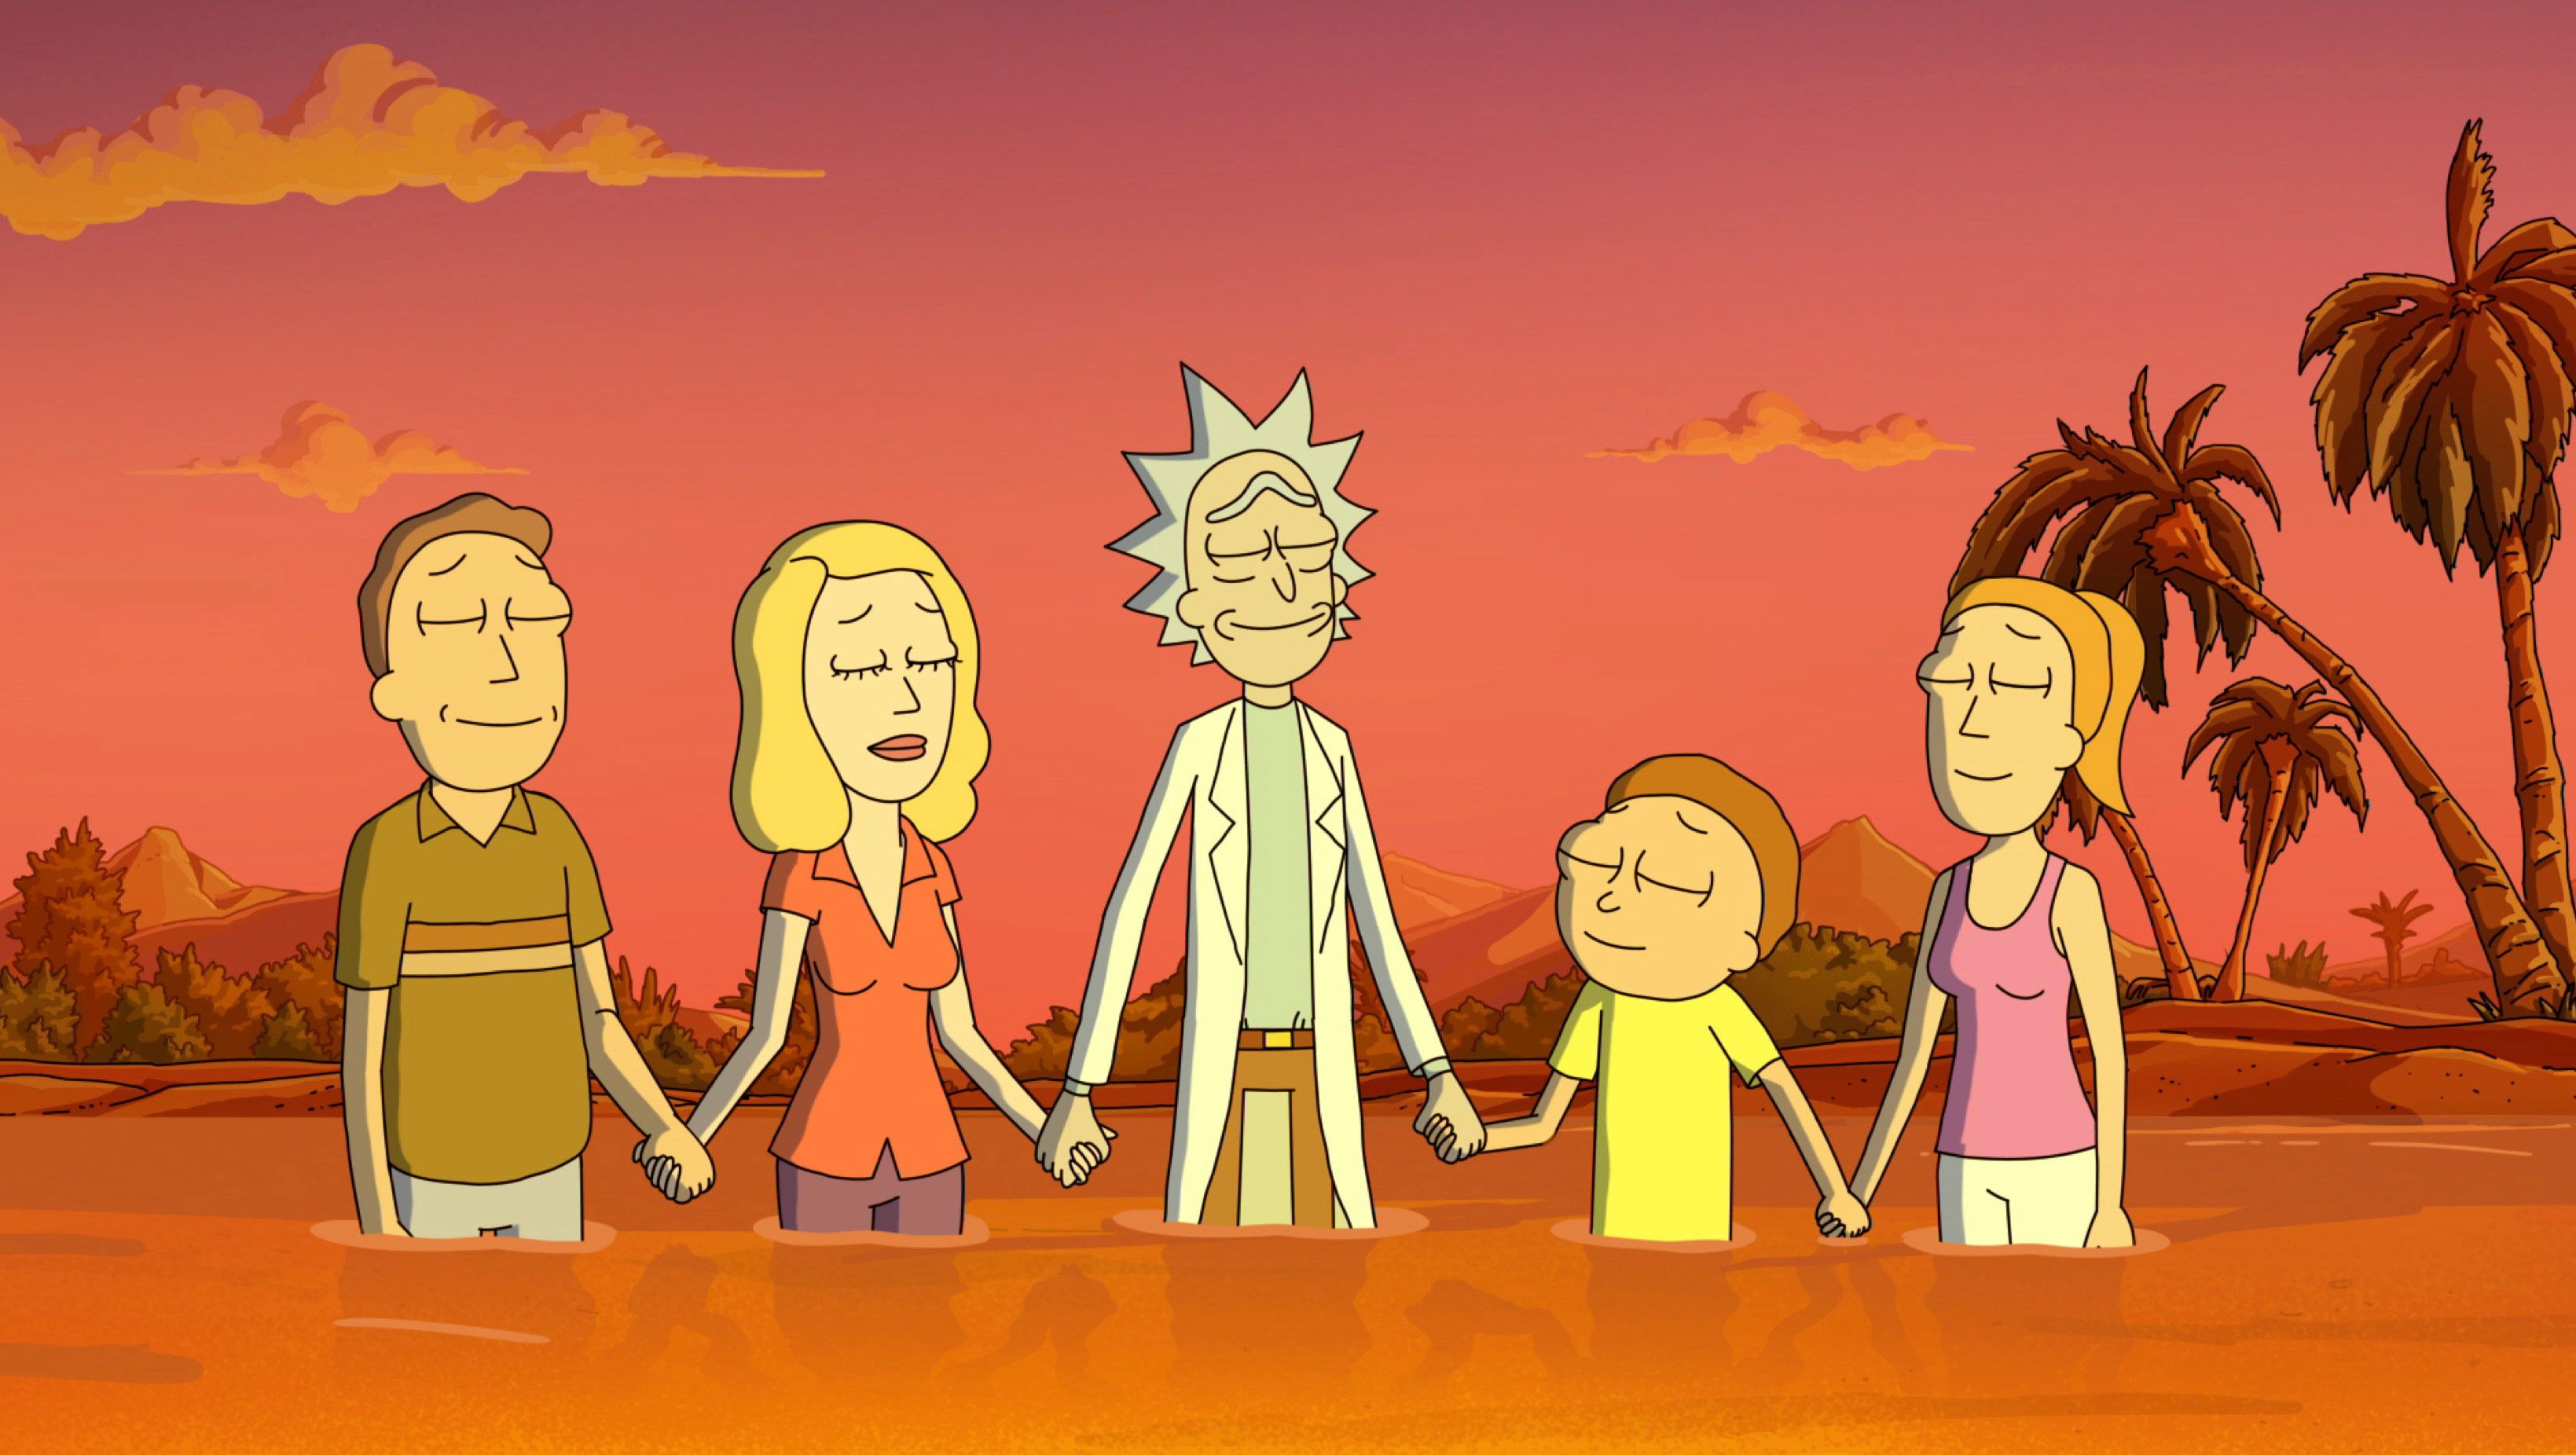 Rick and Morty season 6b release date, cast and more